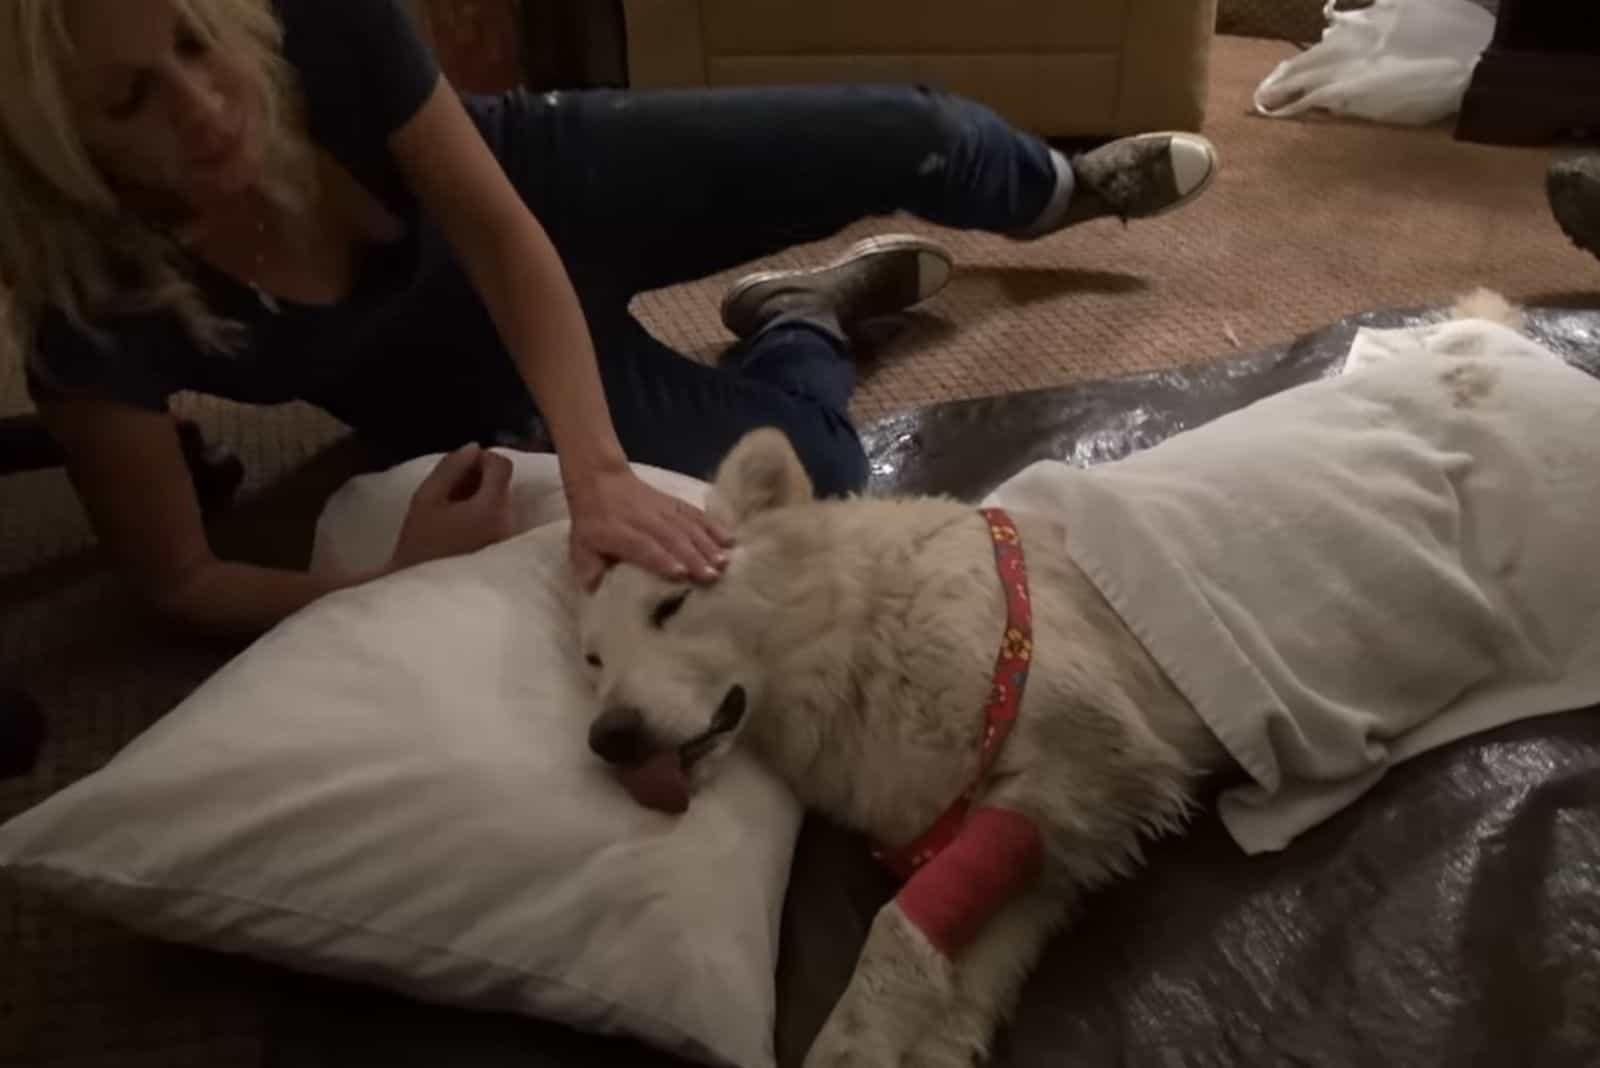 white german shepherd waking up from the anesthesia while a woman cuddling her